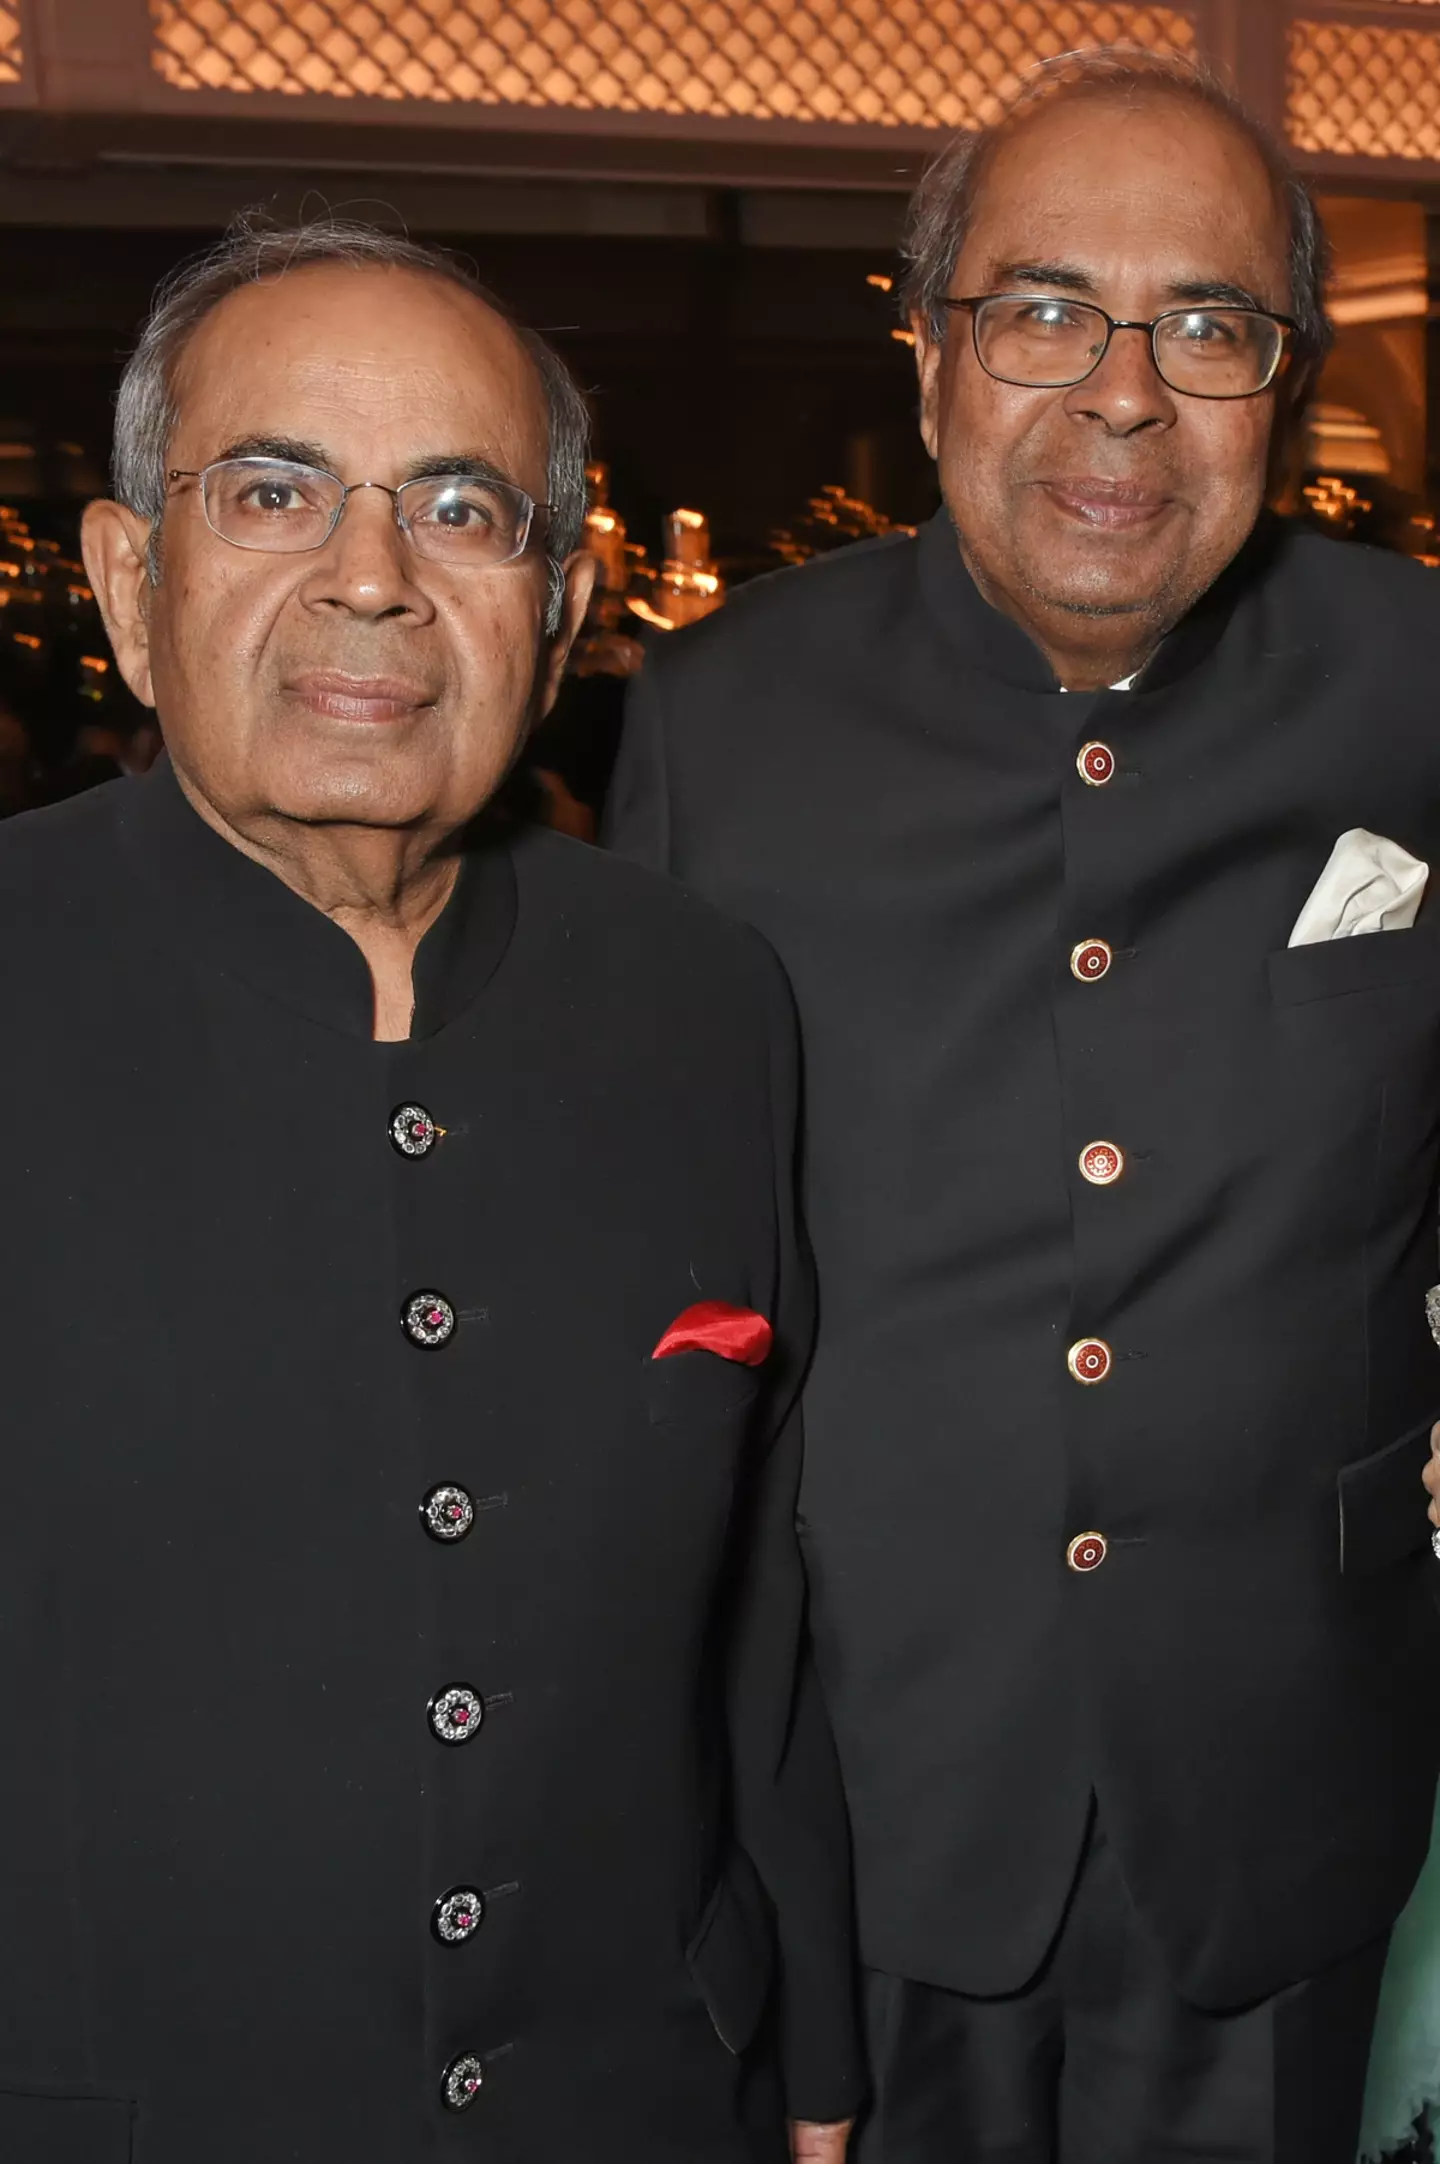 The Hinduja family has been top of the UK's rich list for the past three years now. (David M Benett/Dave Benett/Getty Images)